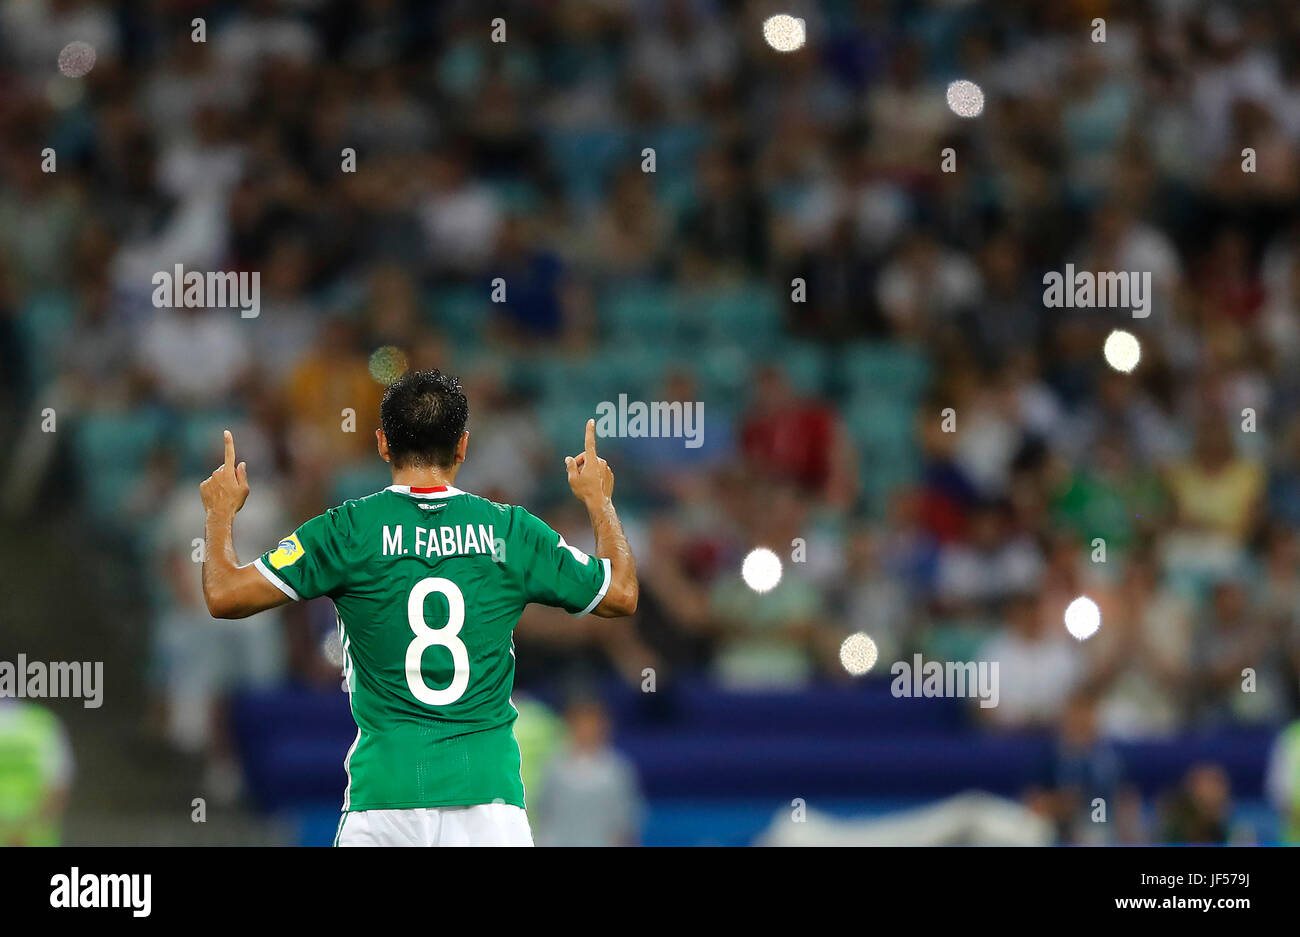 SOCHI, SC - 29.06.2017: GERMANY VS MEXICO - FABIAN Marco of Mexico celebrates his goal during a match between Germany and Mexico valid for the semifinals of the 2017 Confederations Cup on Thursday (29th), held at the Sochi Olympic Stadium in Sochi, Russia. (Photo: Rodolfo Buhrer/La Imagem/Fotoarena) Stock Photo